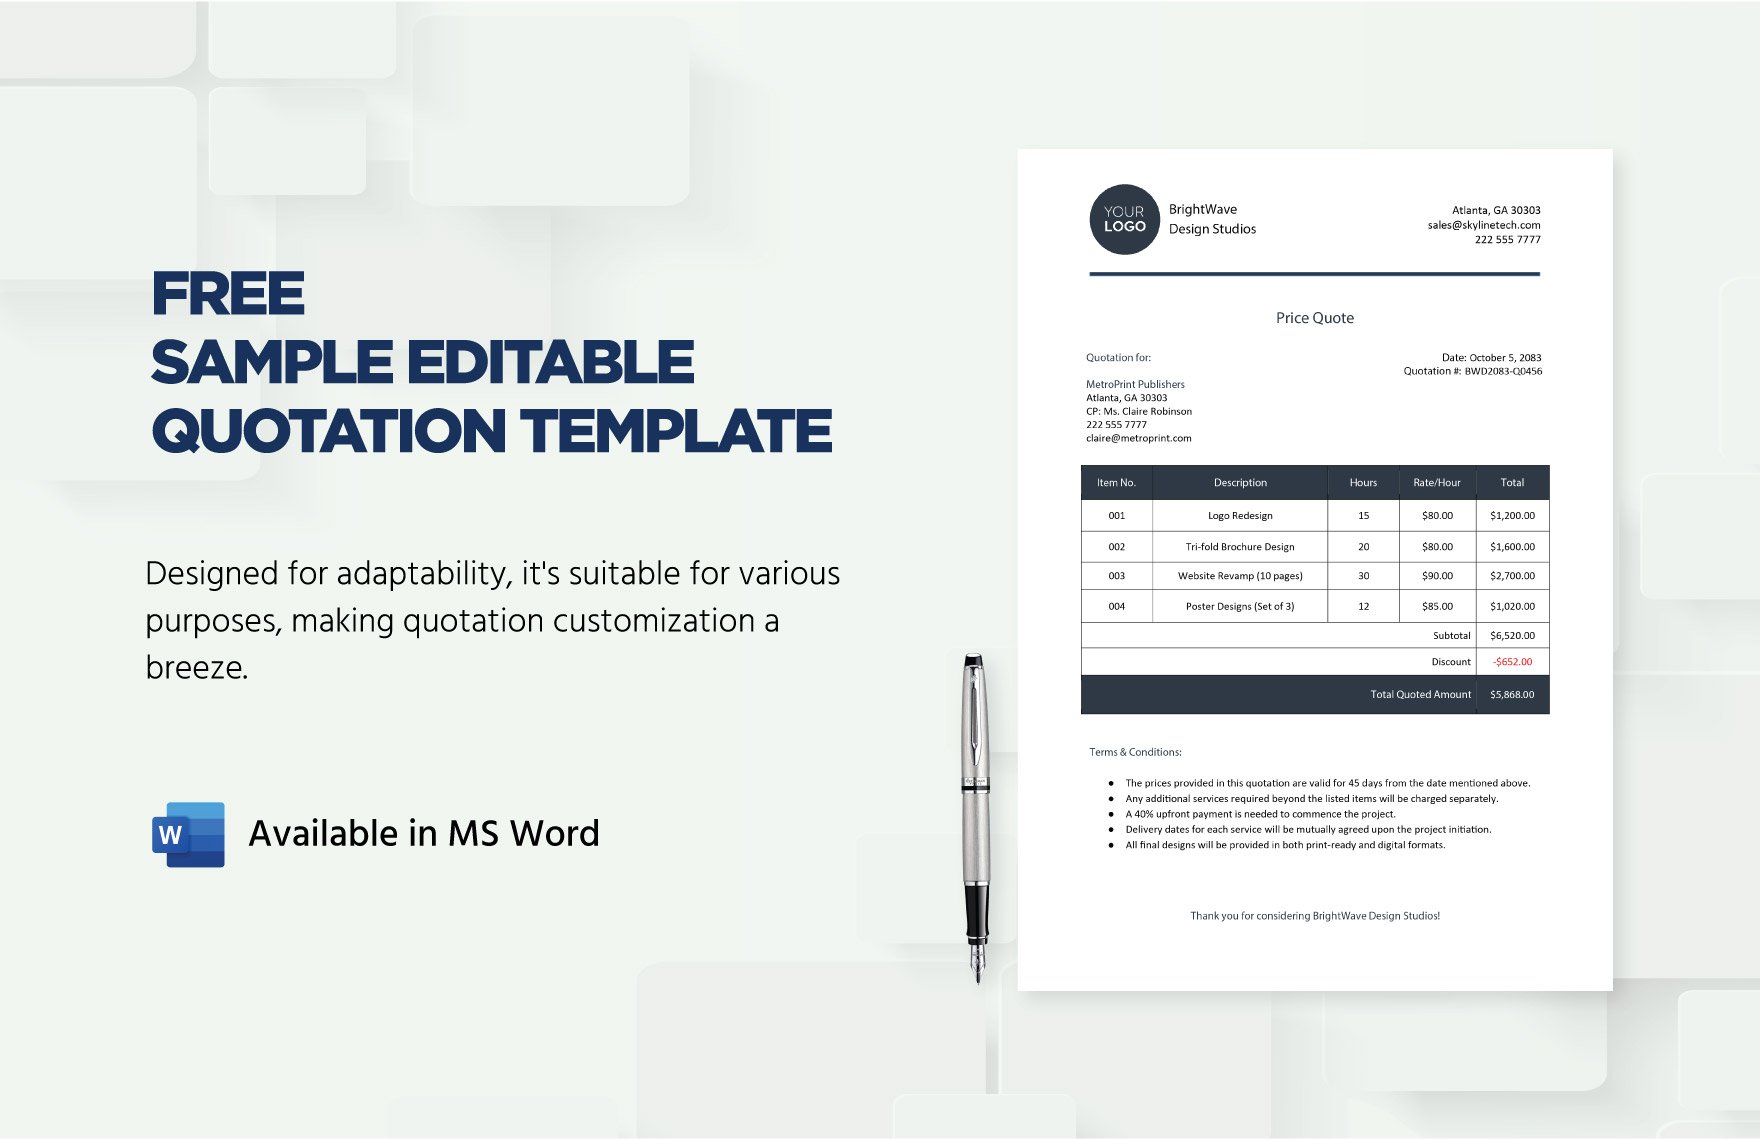 Free Sample Editable Quotation Template